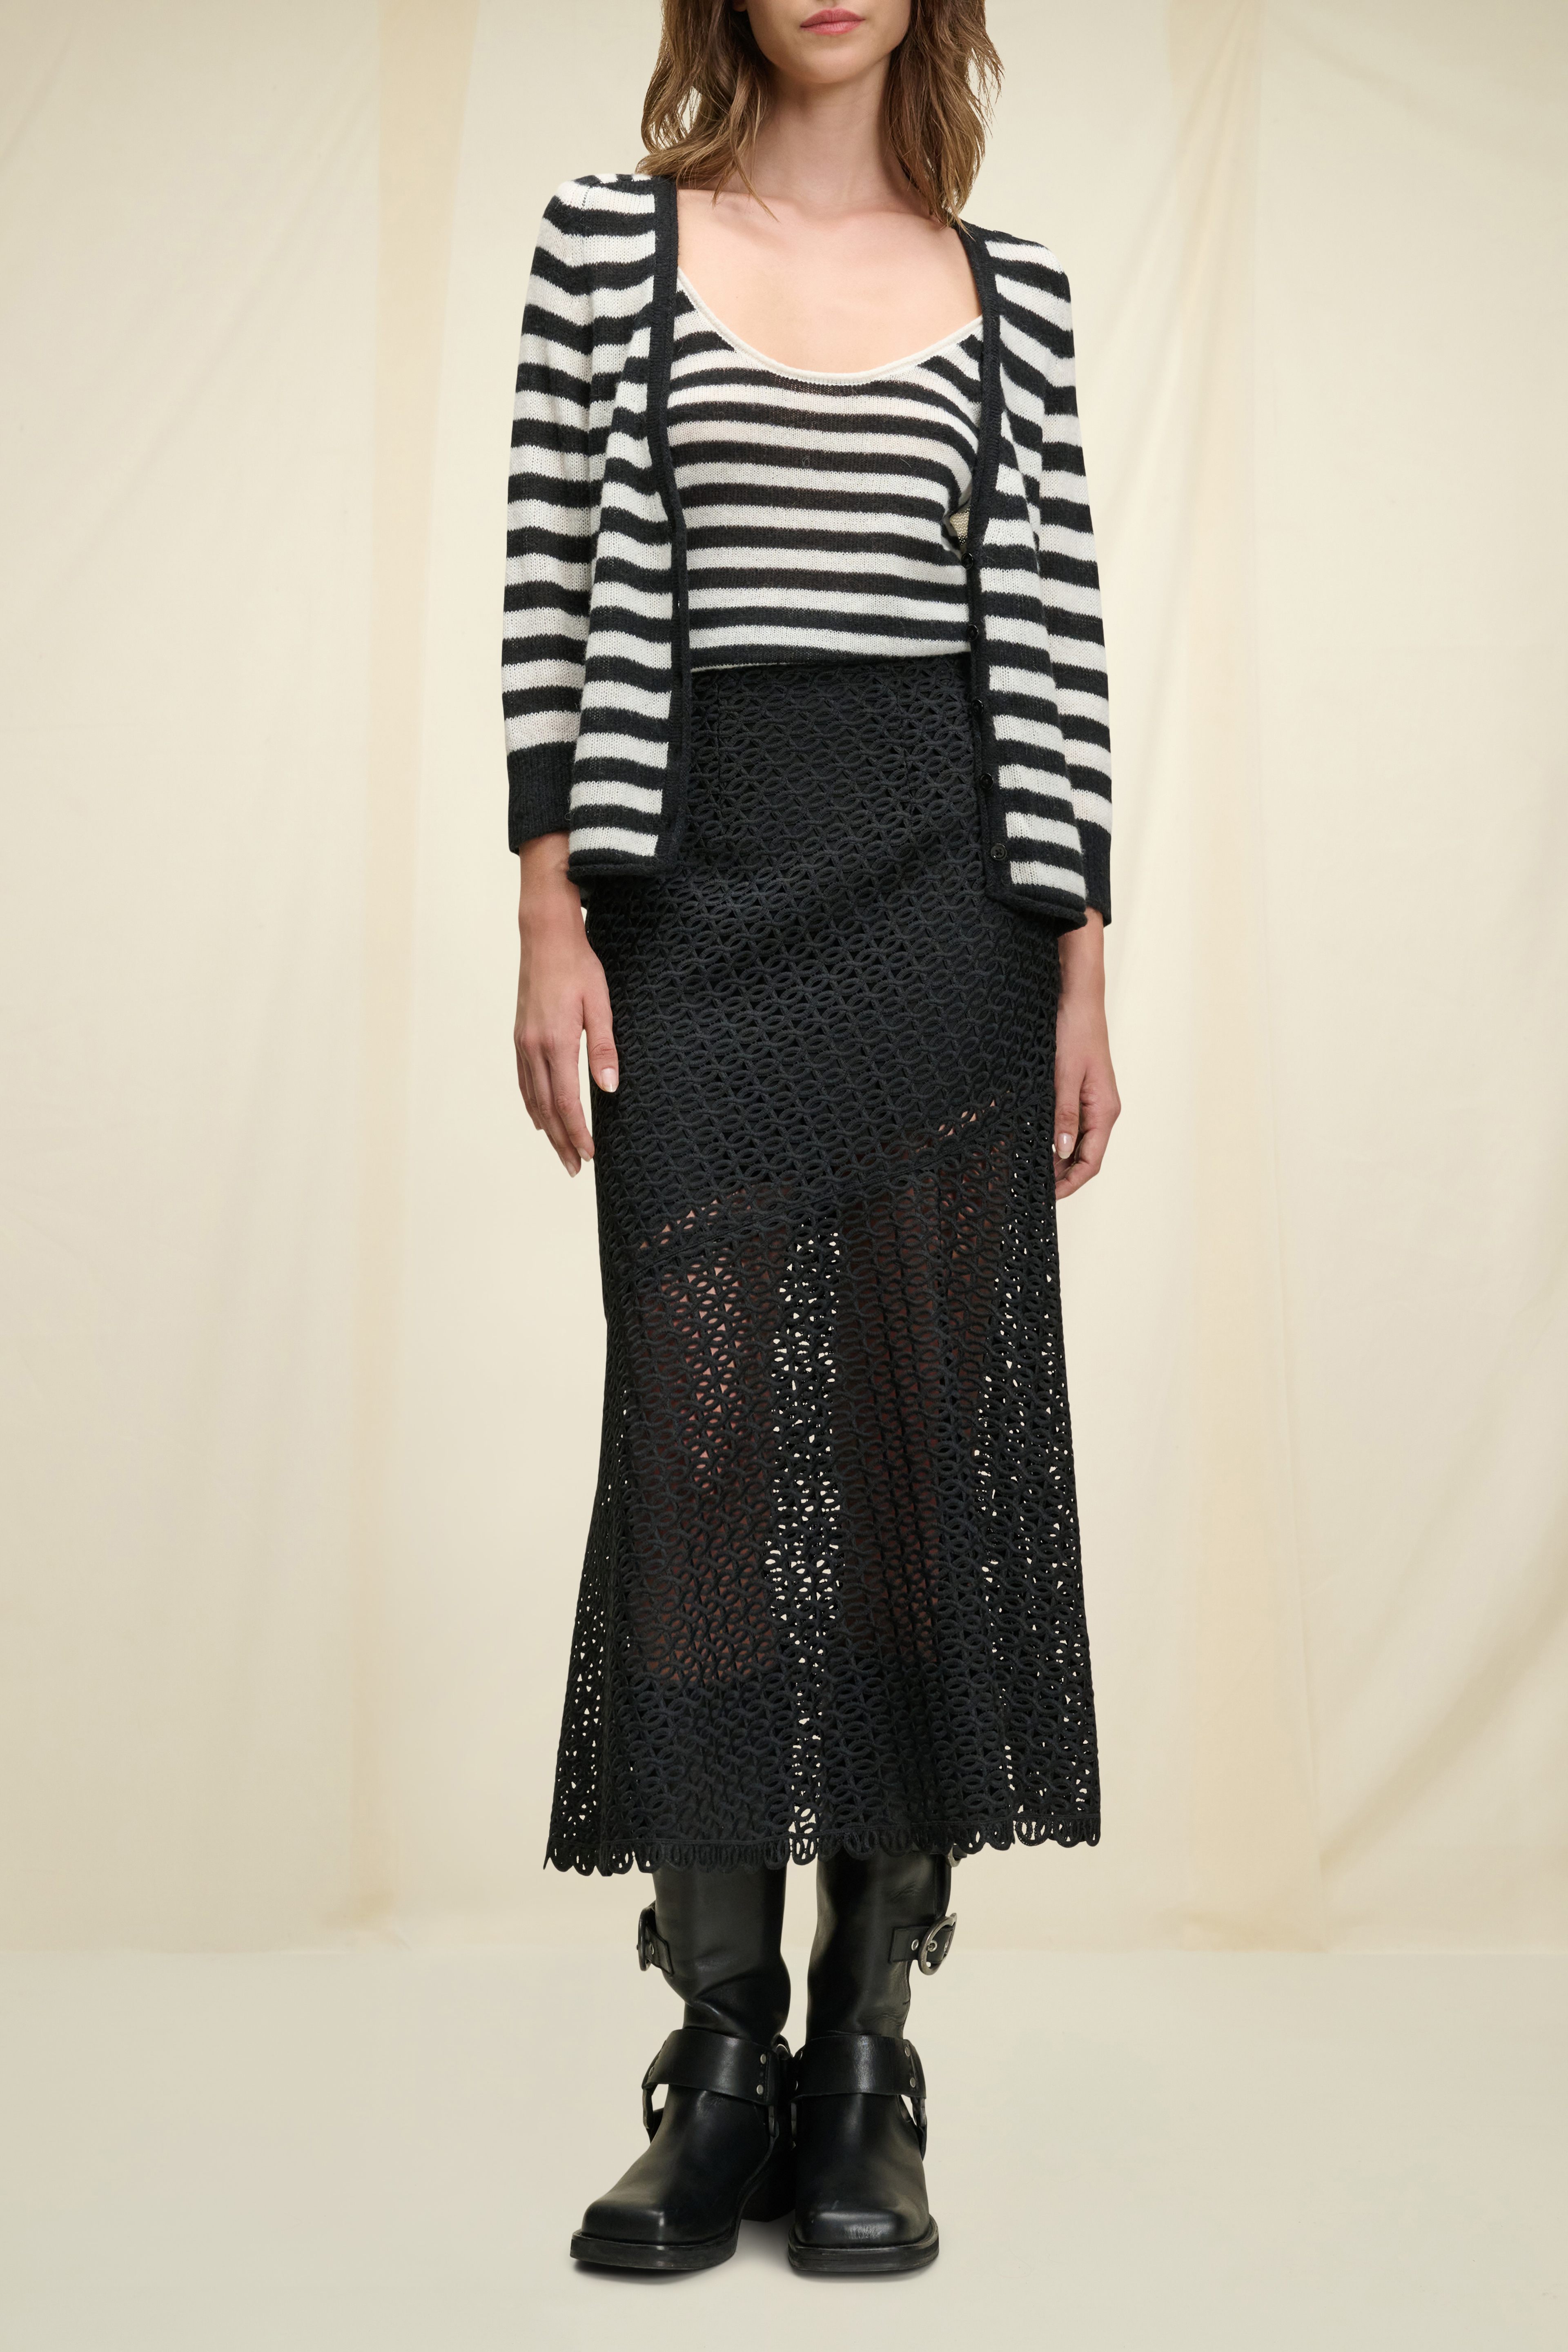 Dorothee Schumacher Twinset comprising a striped V-neck cardigan and